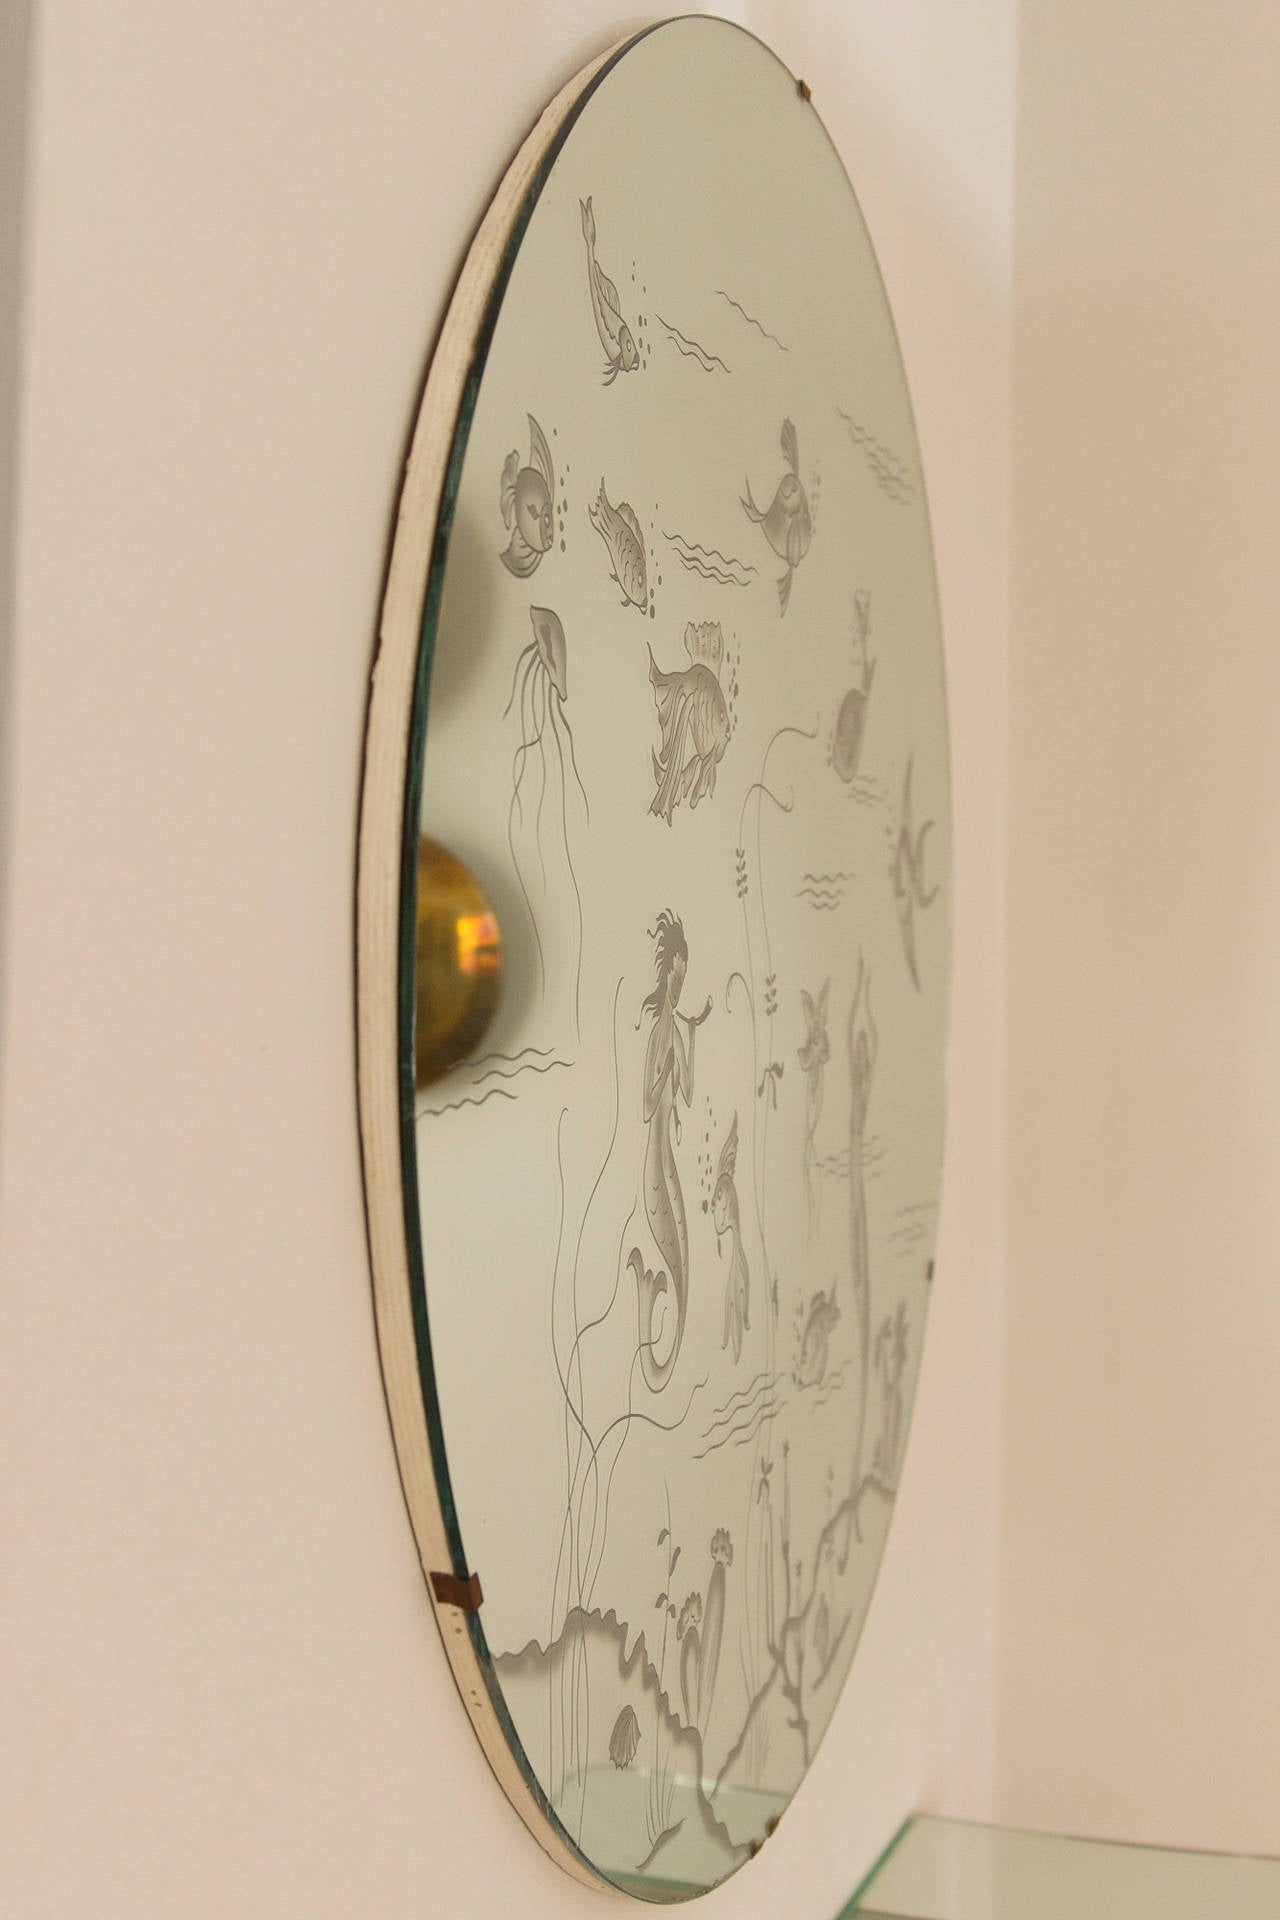 Rare Mirror in the style of Gio Ponti, Italy circa 1955, engraved Ocean pattern like fishes, mermaids, seagrass, jellyfish and sea shells. Mounted on white lacquered wood plate. Diameter 90 cm